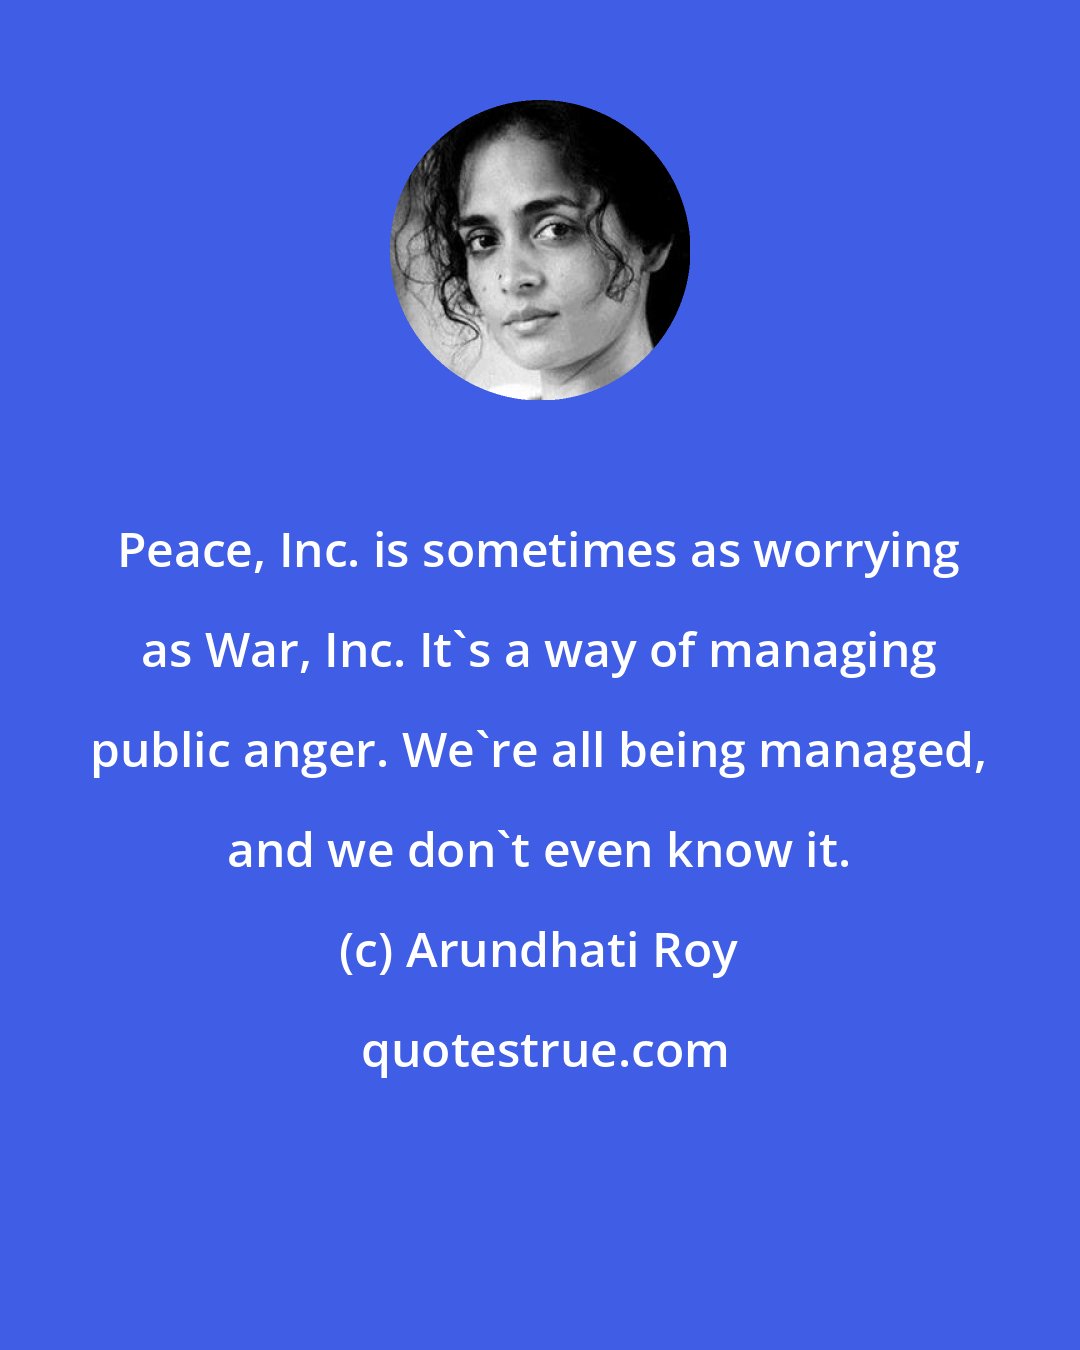 Arundhati Roy: Peace, Inc. is sometimes as worrying as War, Inc. It's a way of managing public anger. We're all being managed, and we don't even know it.